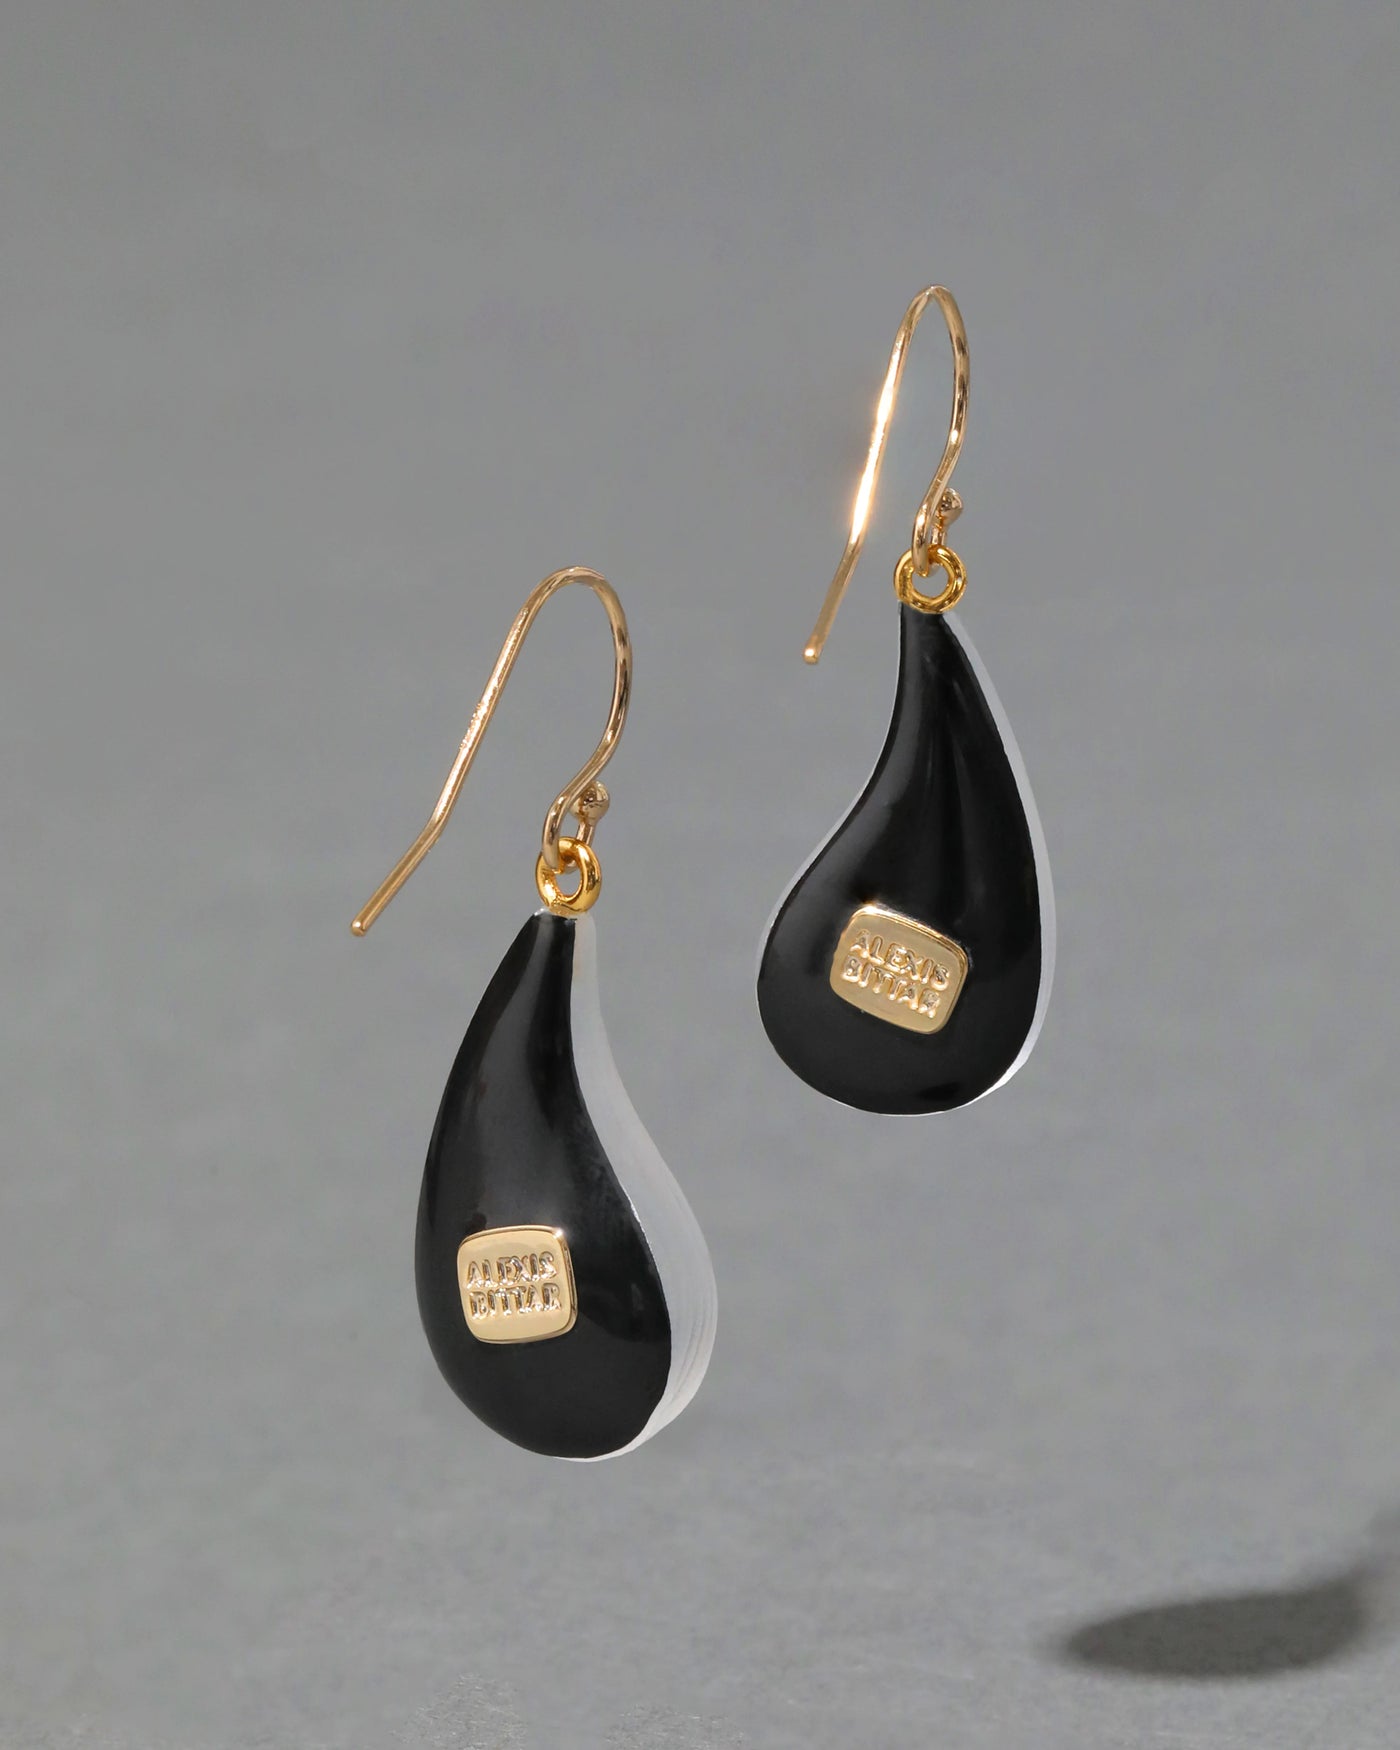 Lucite Dewdrop Earring - Silver